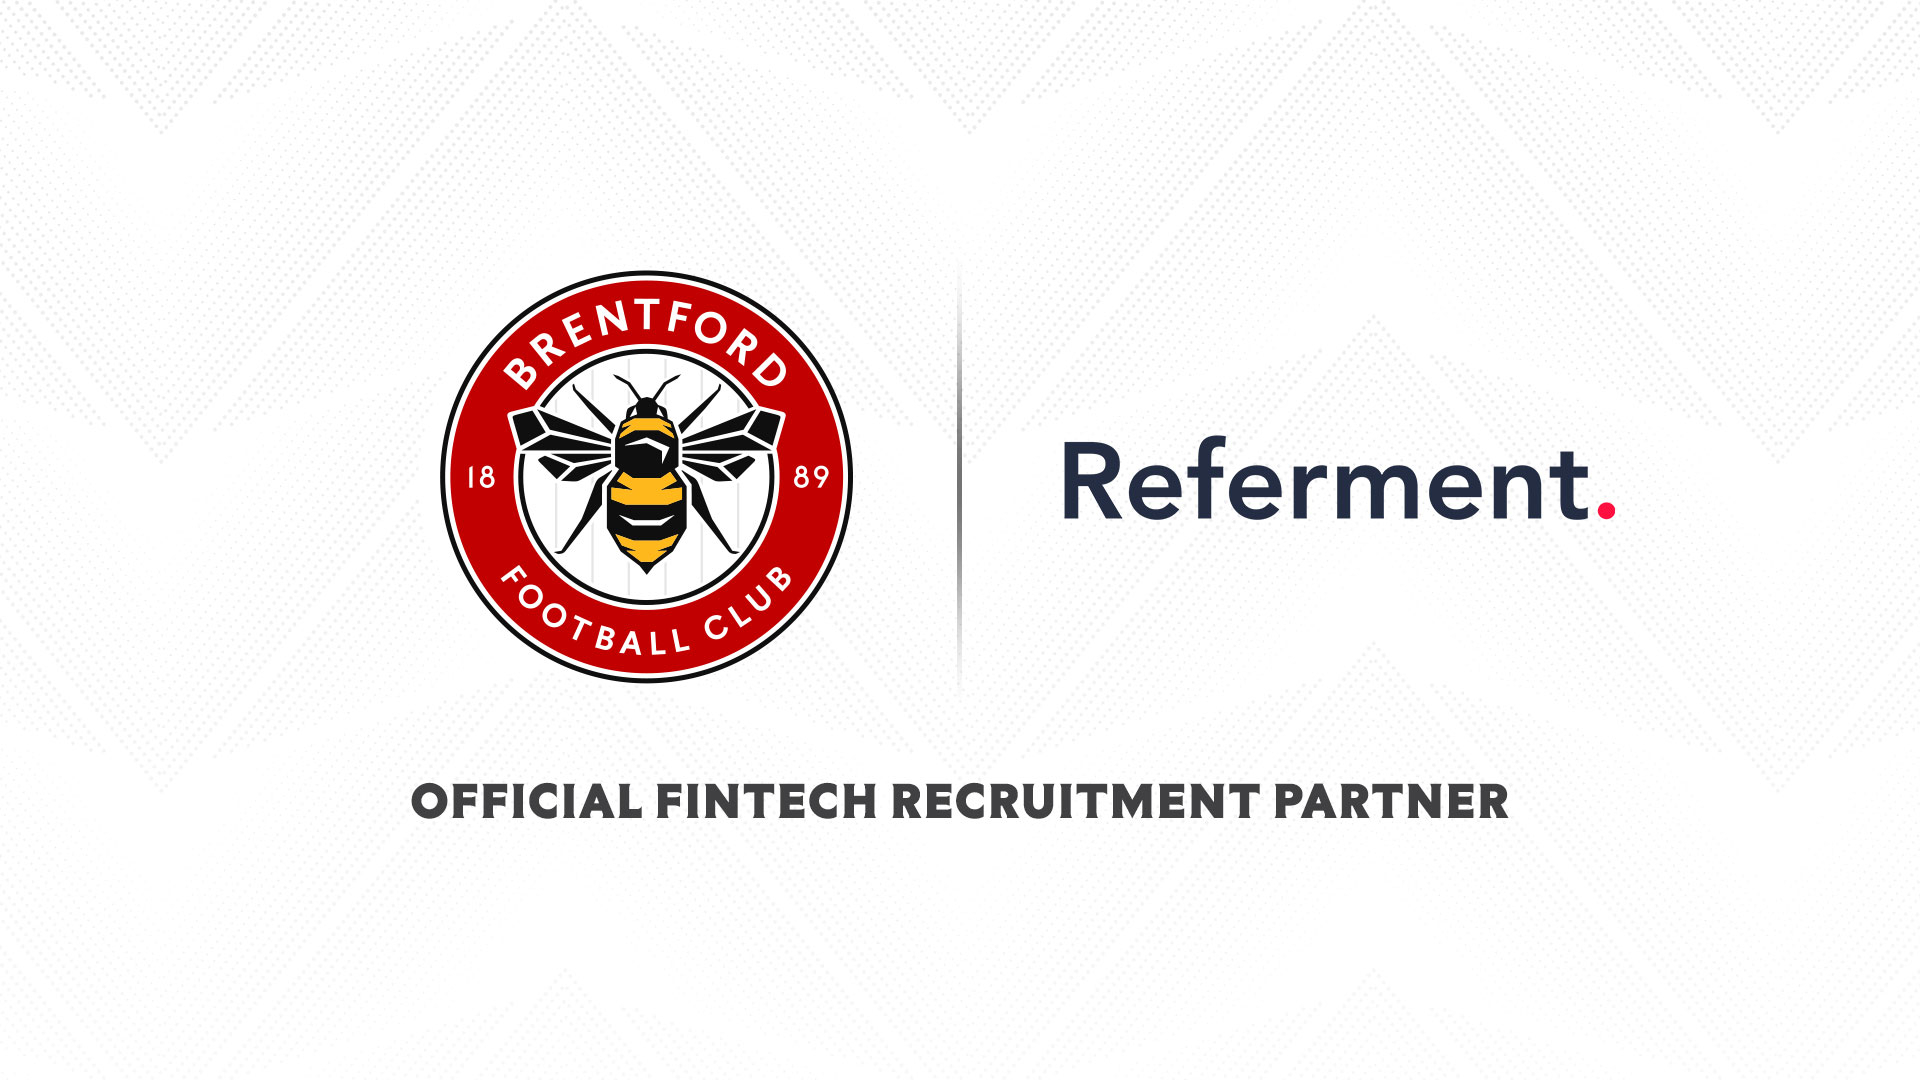 The Official FinTech Recruitment Partners for Brentford FC